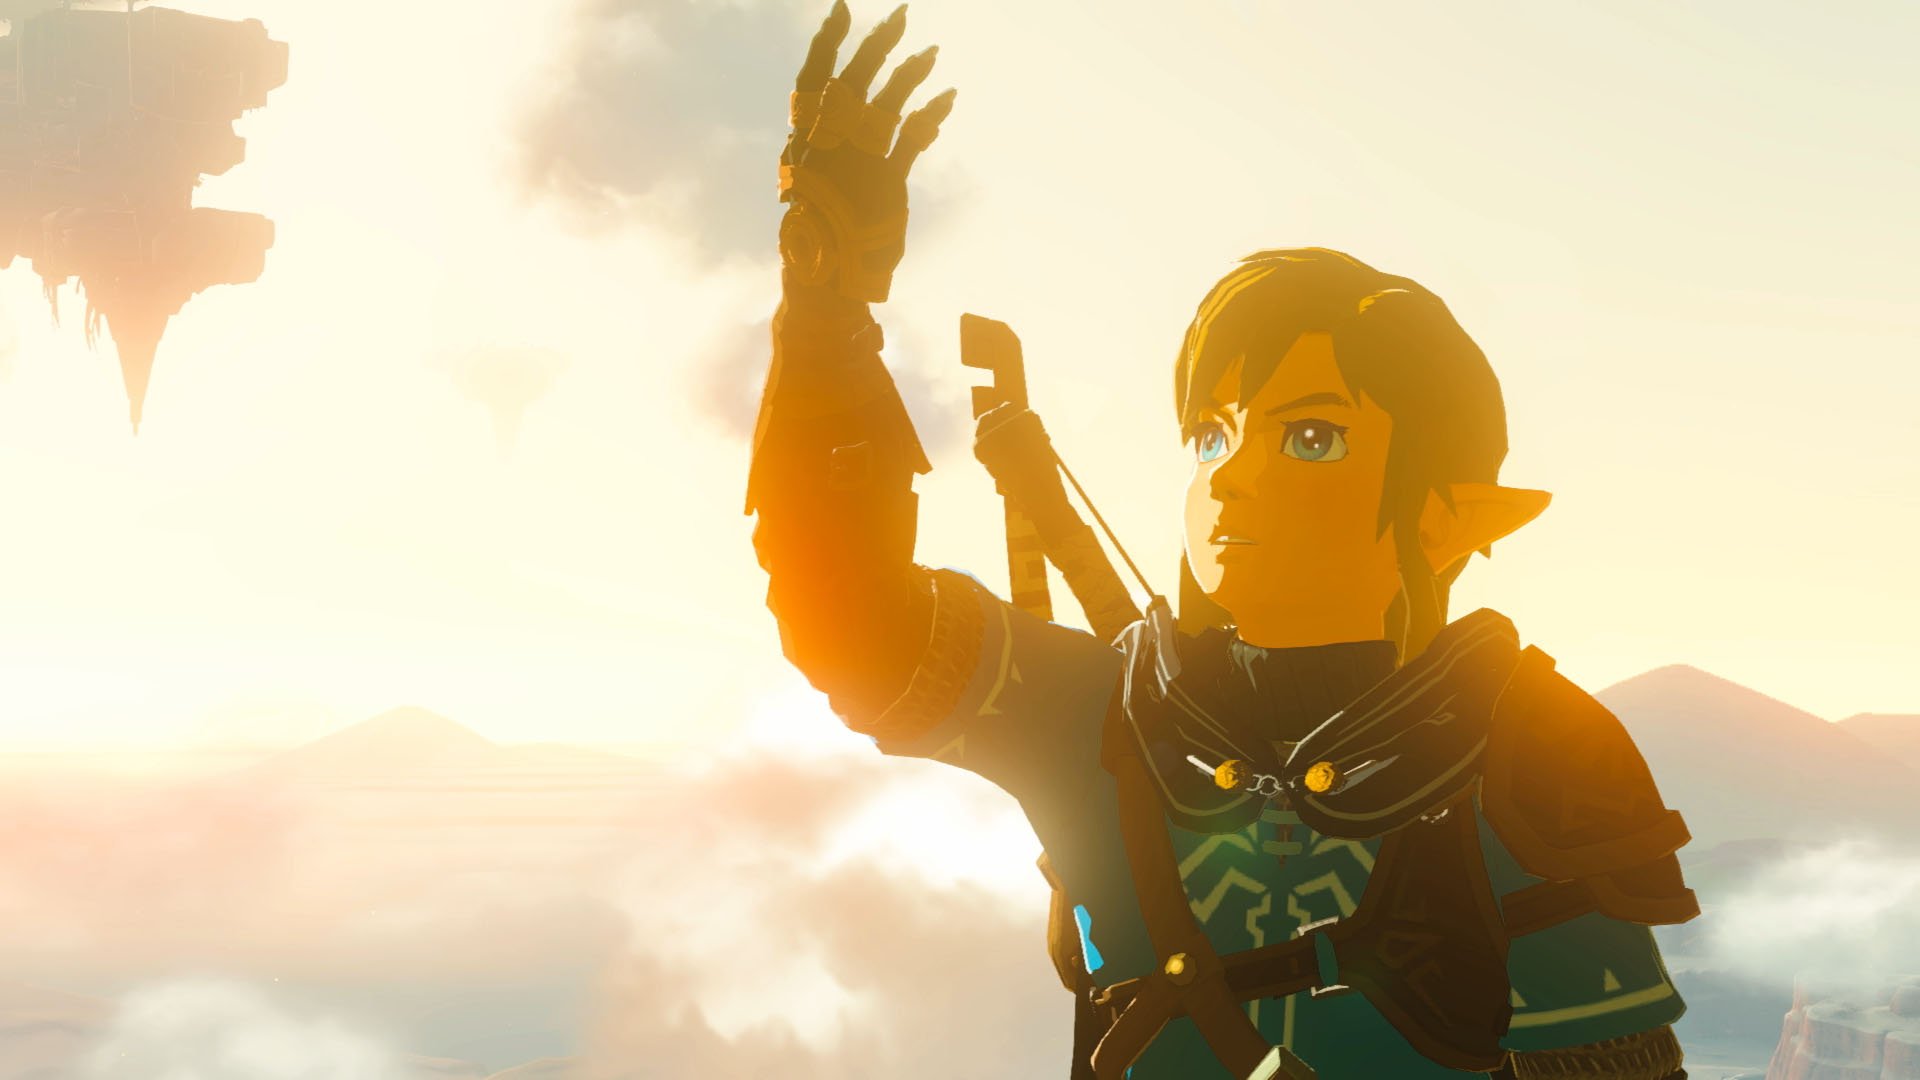 Round Up: The Reviews Are In For The Legend Of Zelda: Tears Of The Kingdom